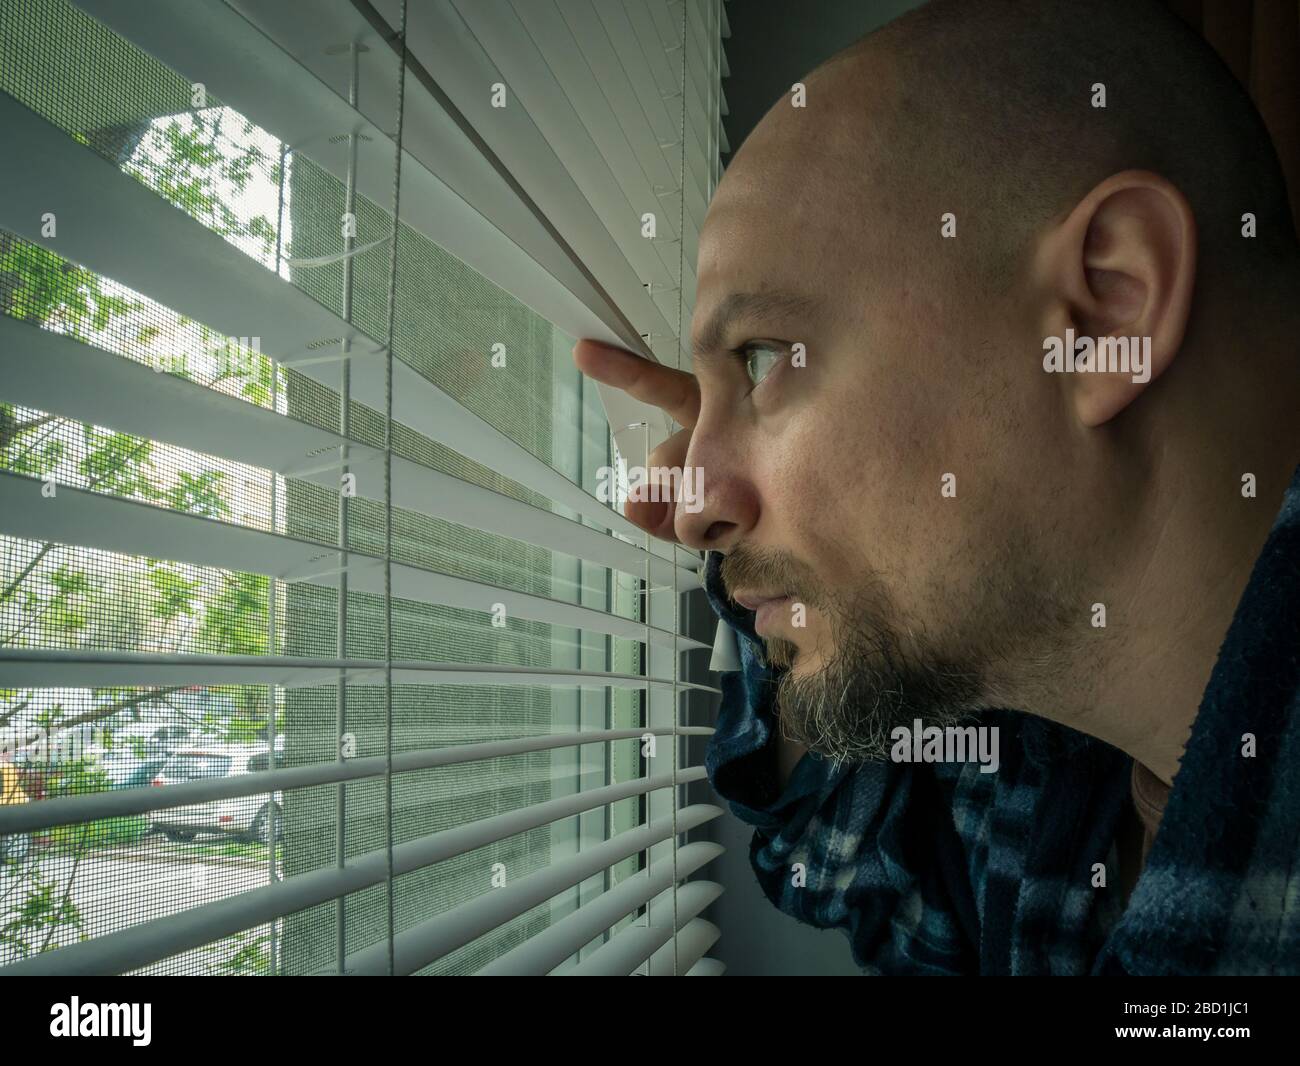 Man in isolation looking through window blinds. Man forced to stay inside the house as a result of the restrictions caused by the Coronavirus outbreak Stock Photo